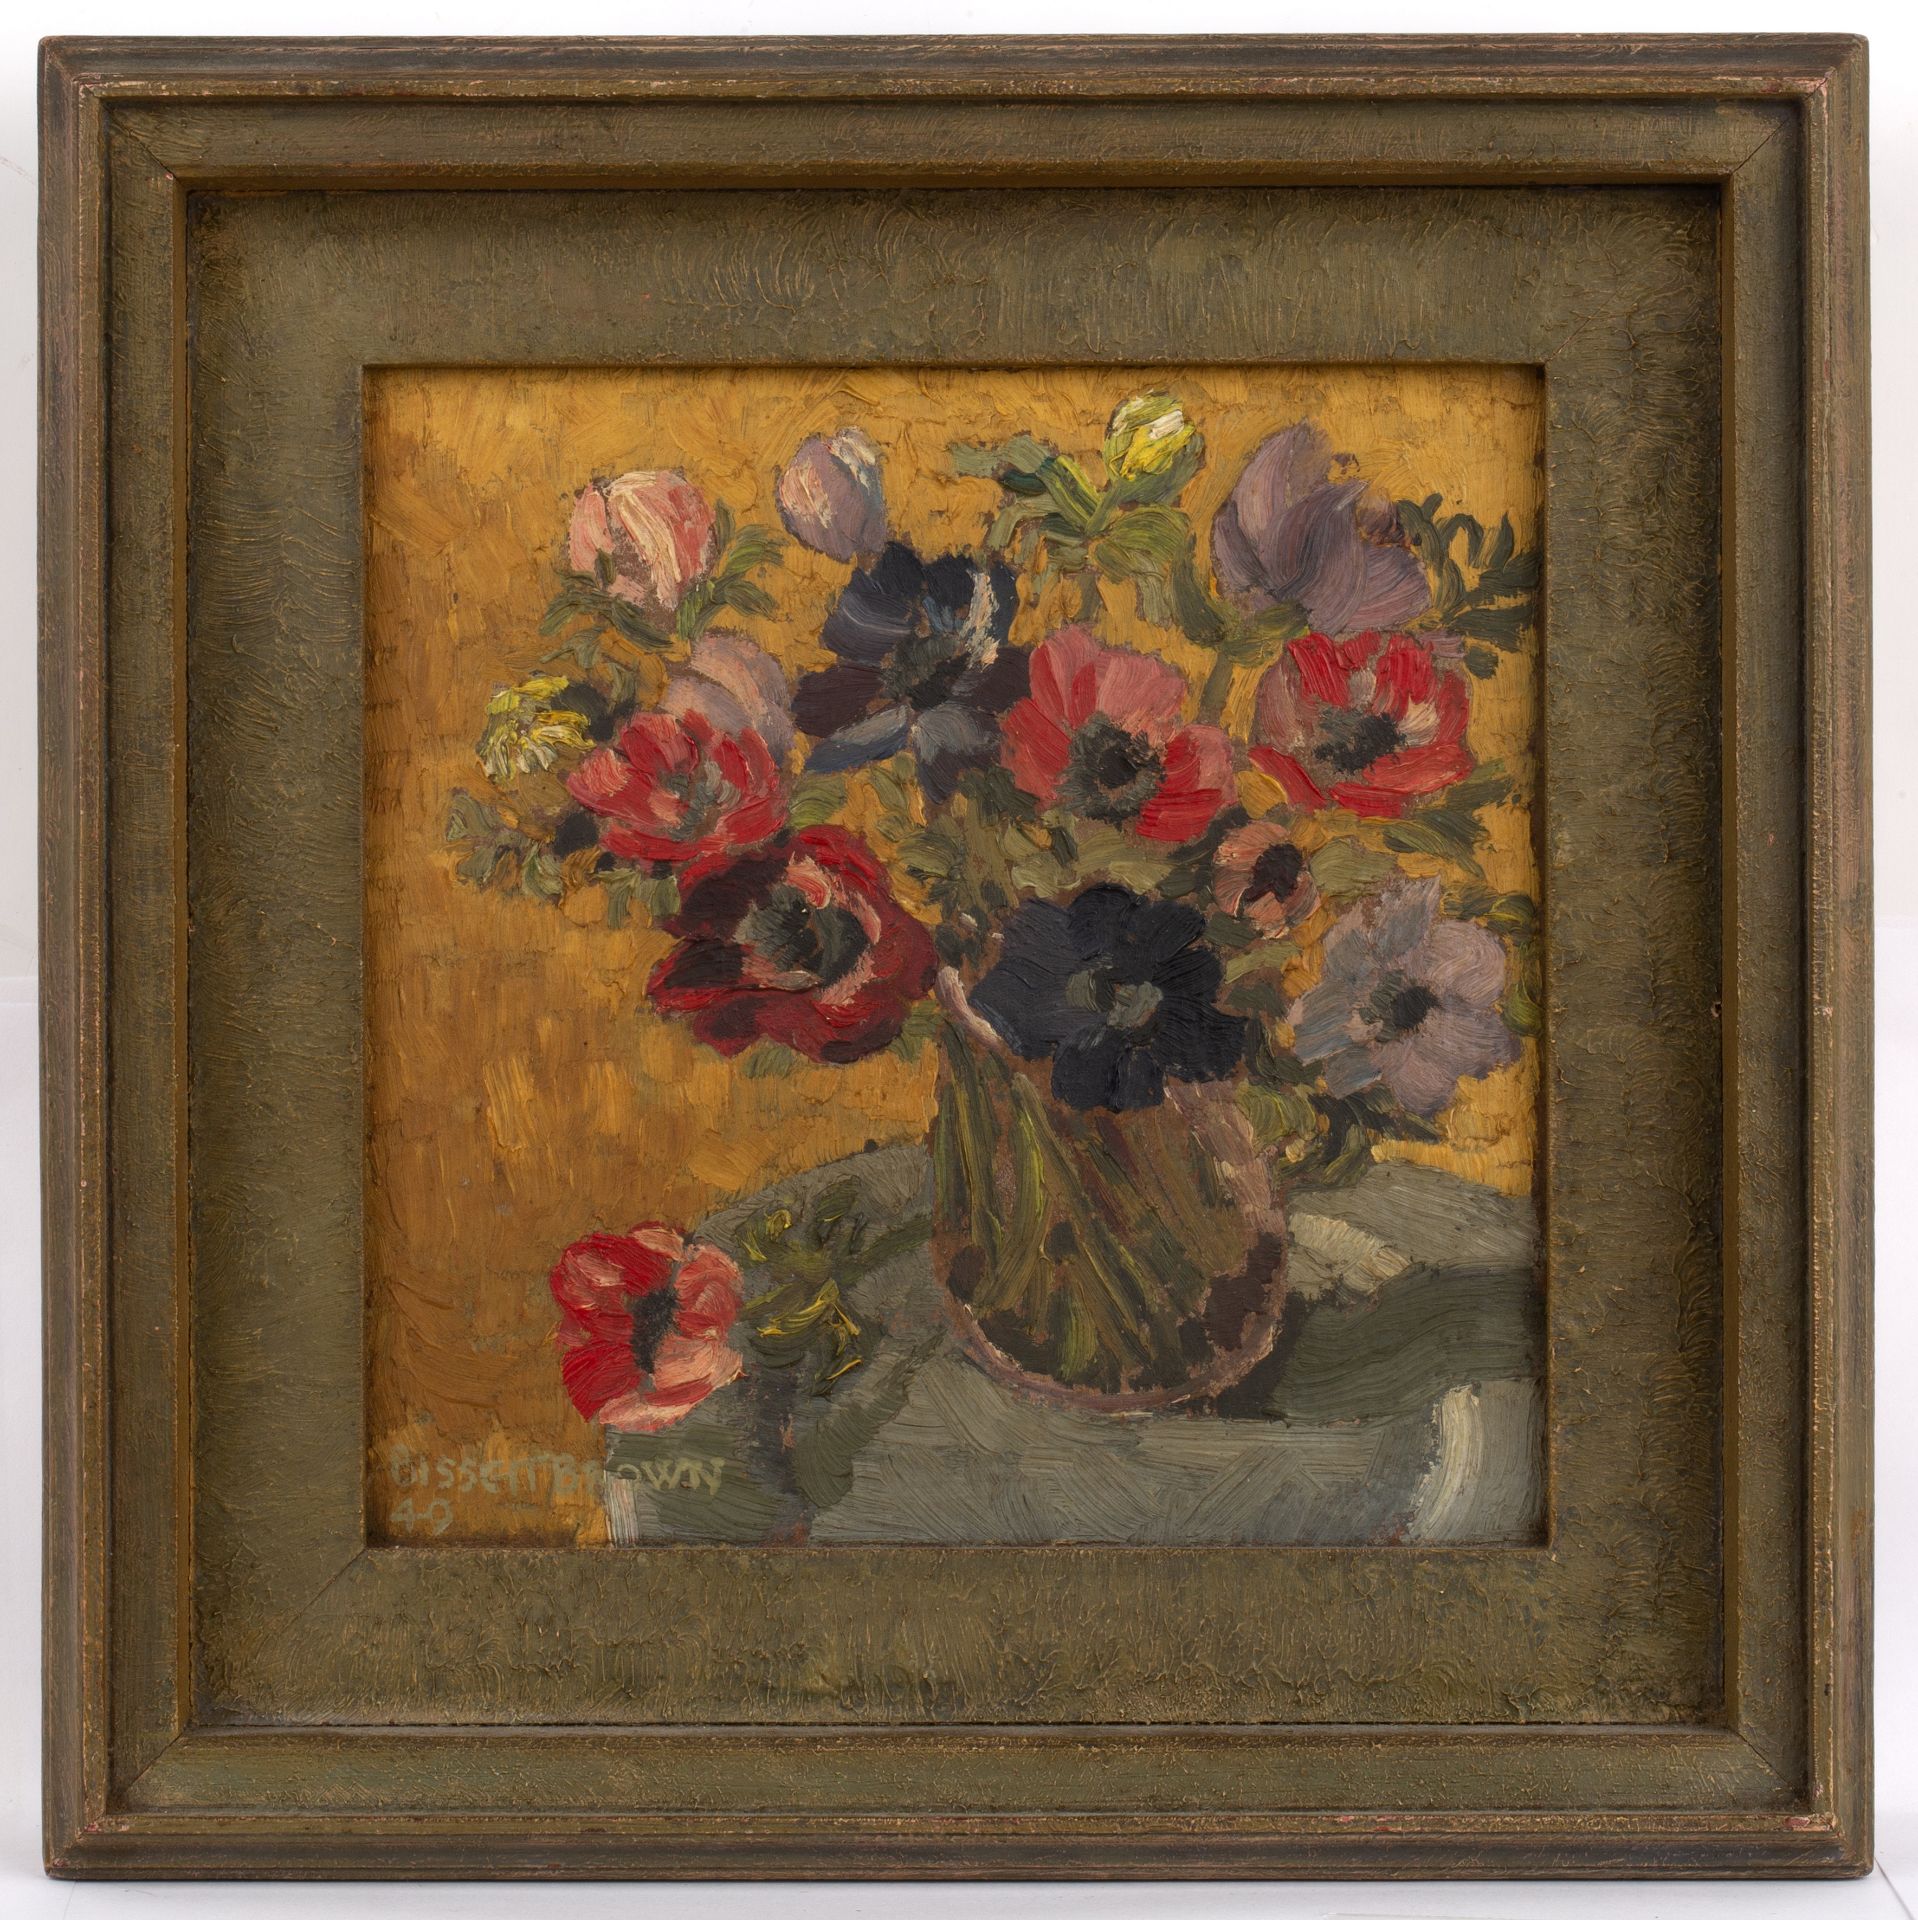 Brown (20th Century School) 'Still life vase of flowers', oil on panel, signed and dated 1940 - Image 2 of 3